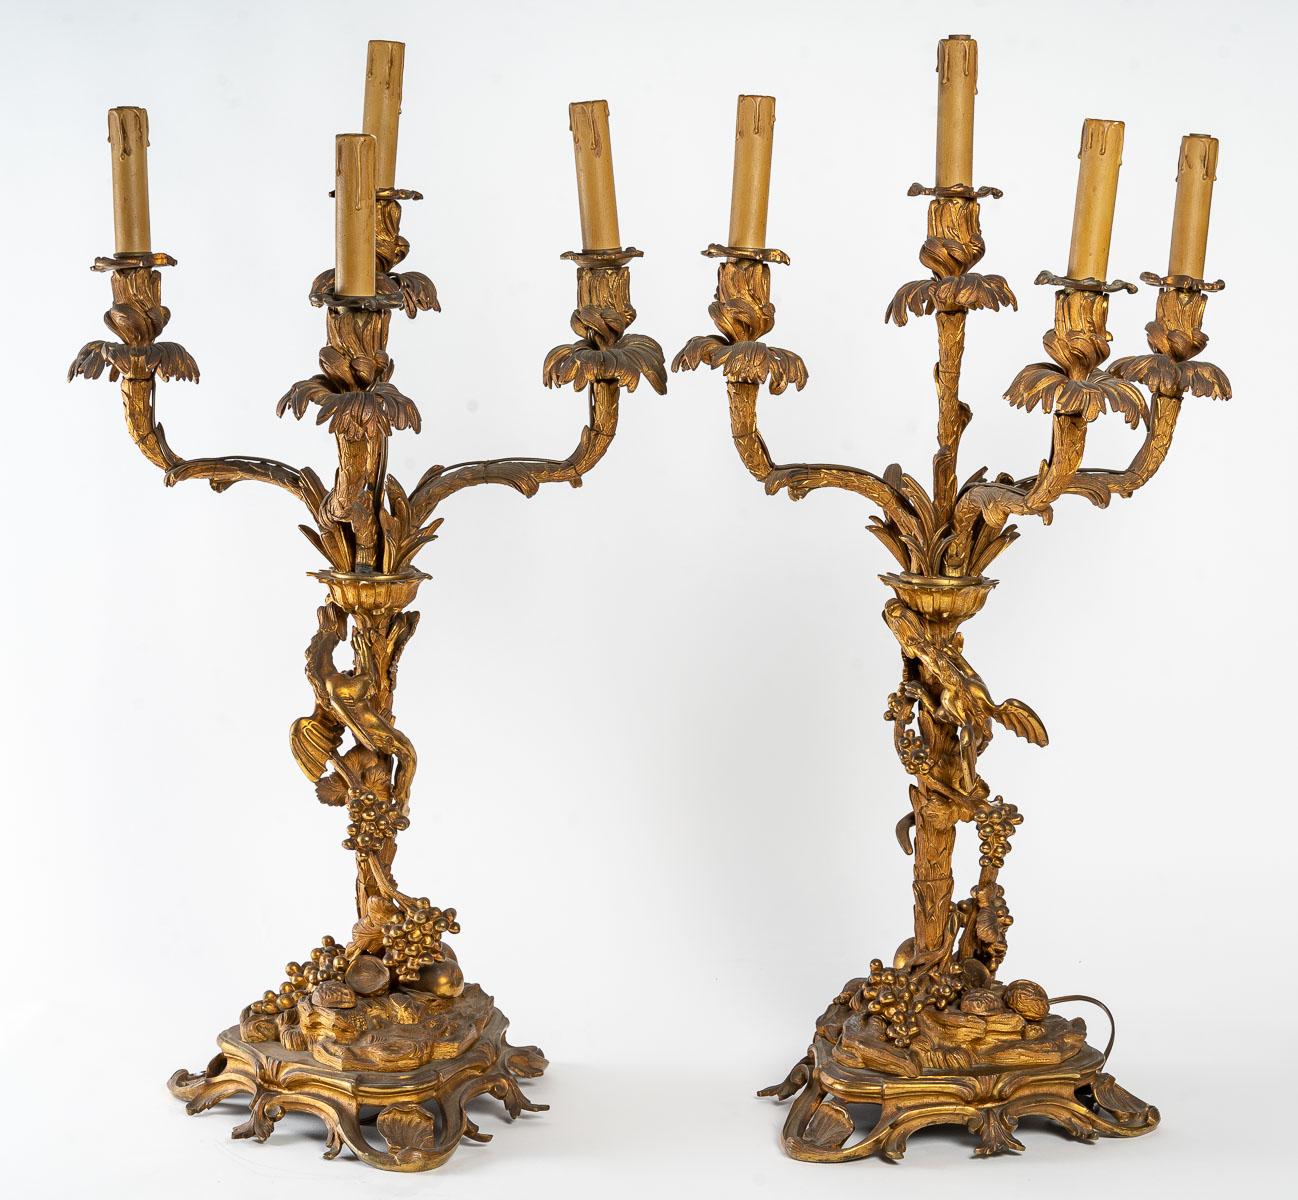 19th Century Important Pair of Electrified Candelabras, Gilded and Chiseled Bronze For Sale